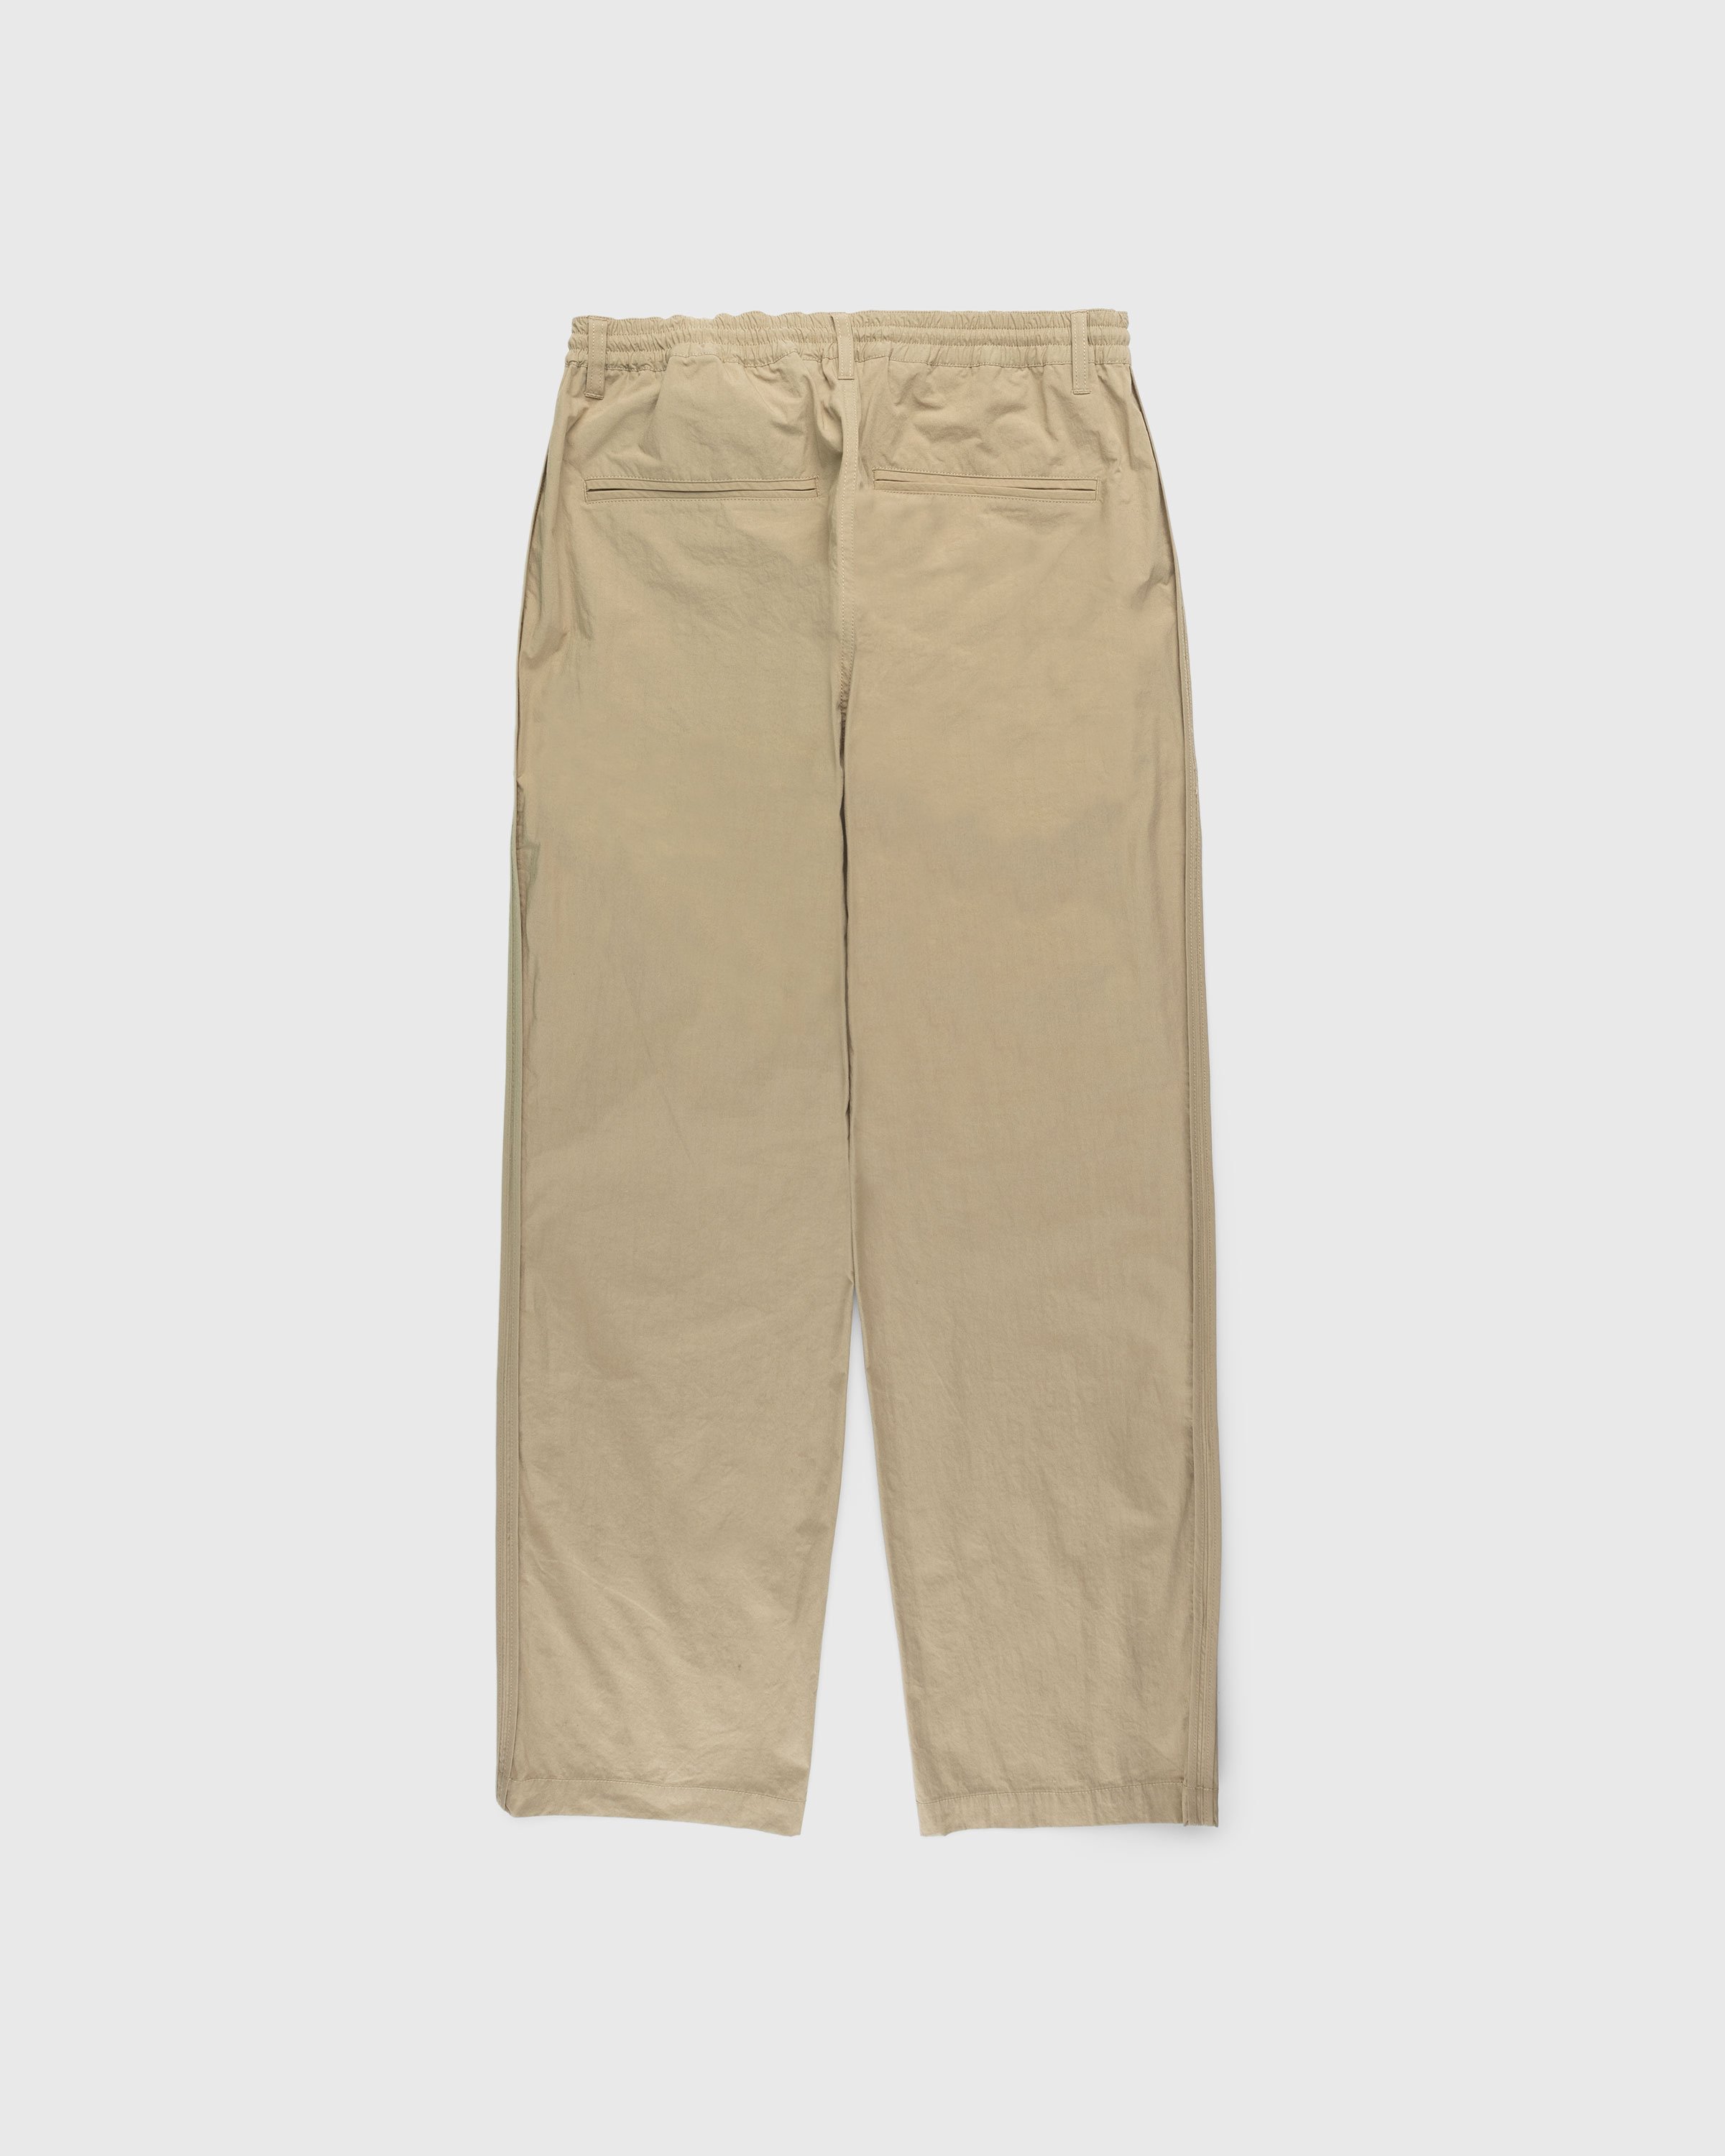 Highsnobiety HS05 - Reverse Piping Elastic Trouser Beige - Clothing - Beige - Image 2